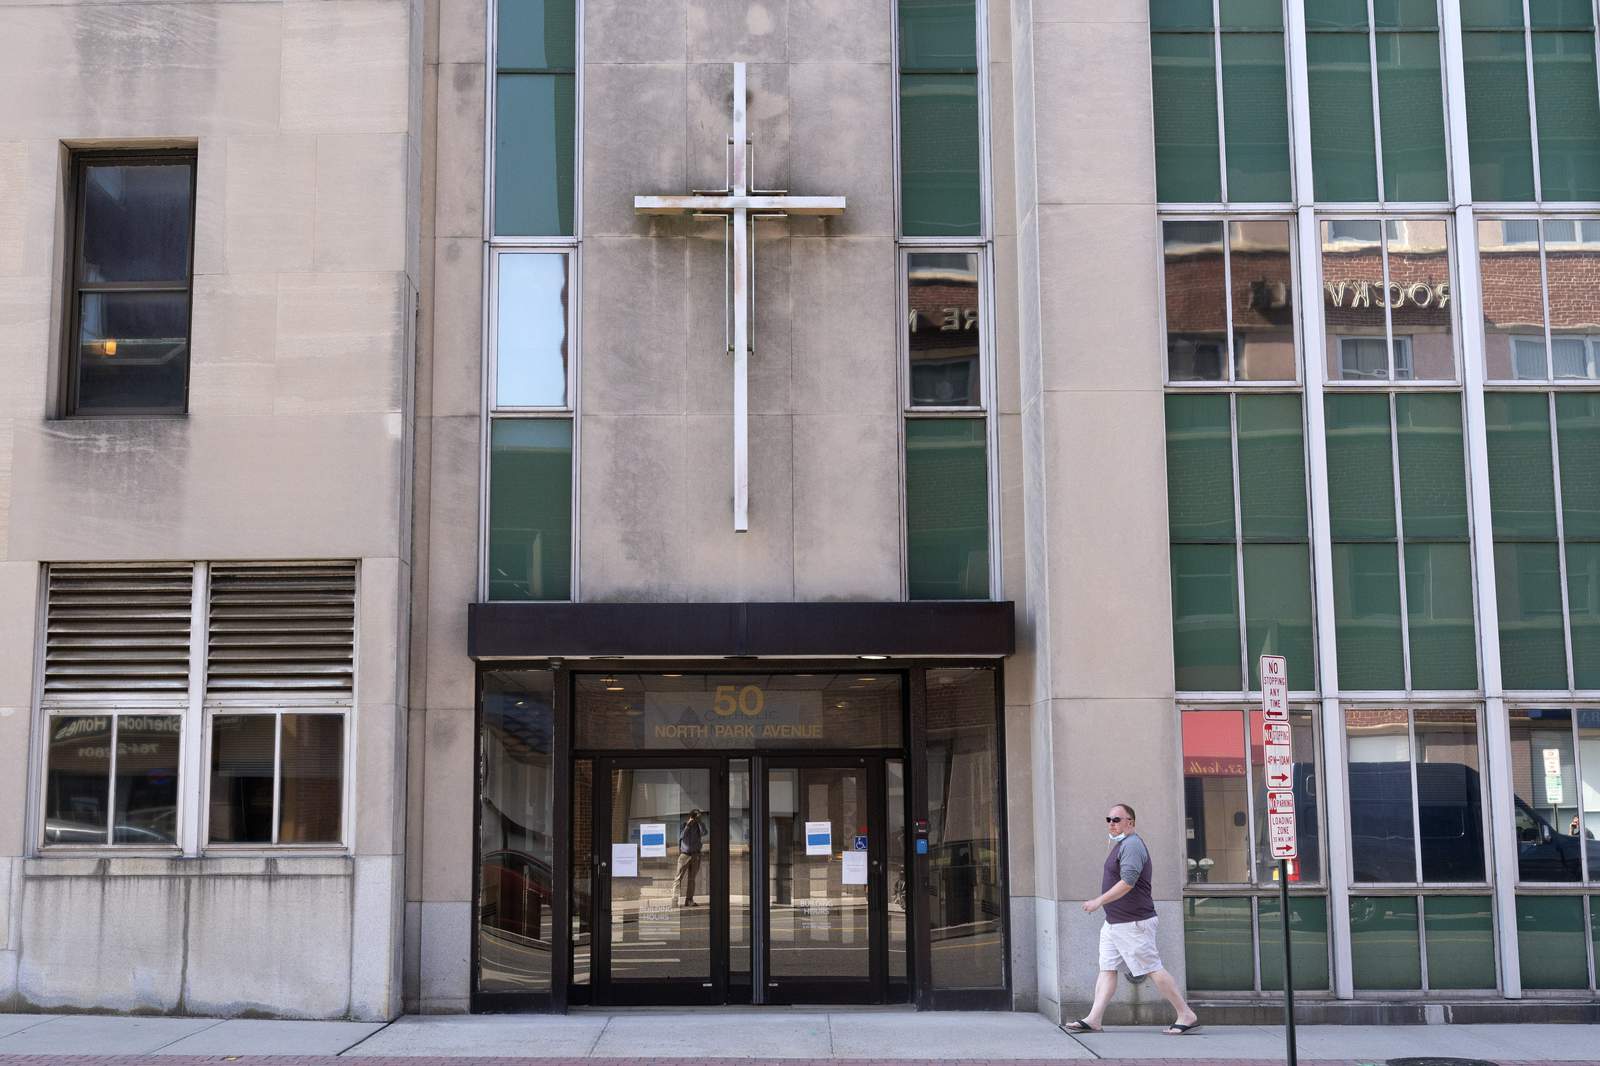 Suburban NY diocese files for bankruptcy amid abuse lawsuits